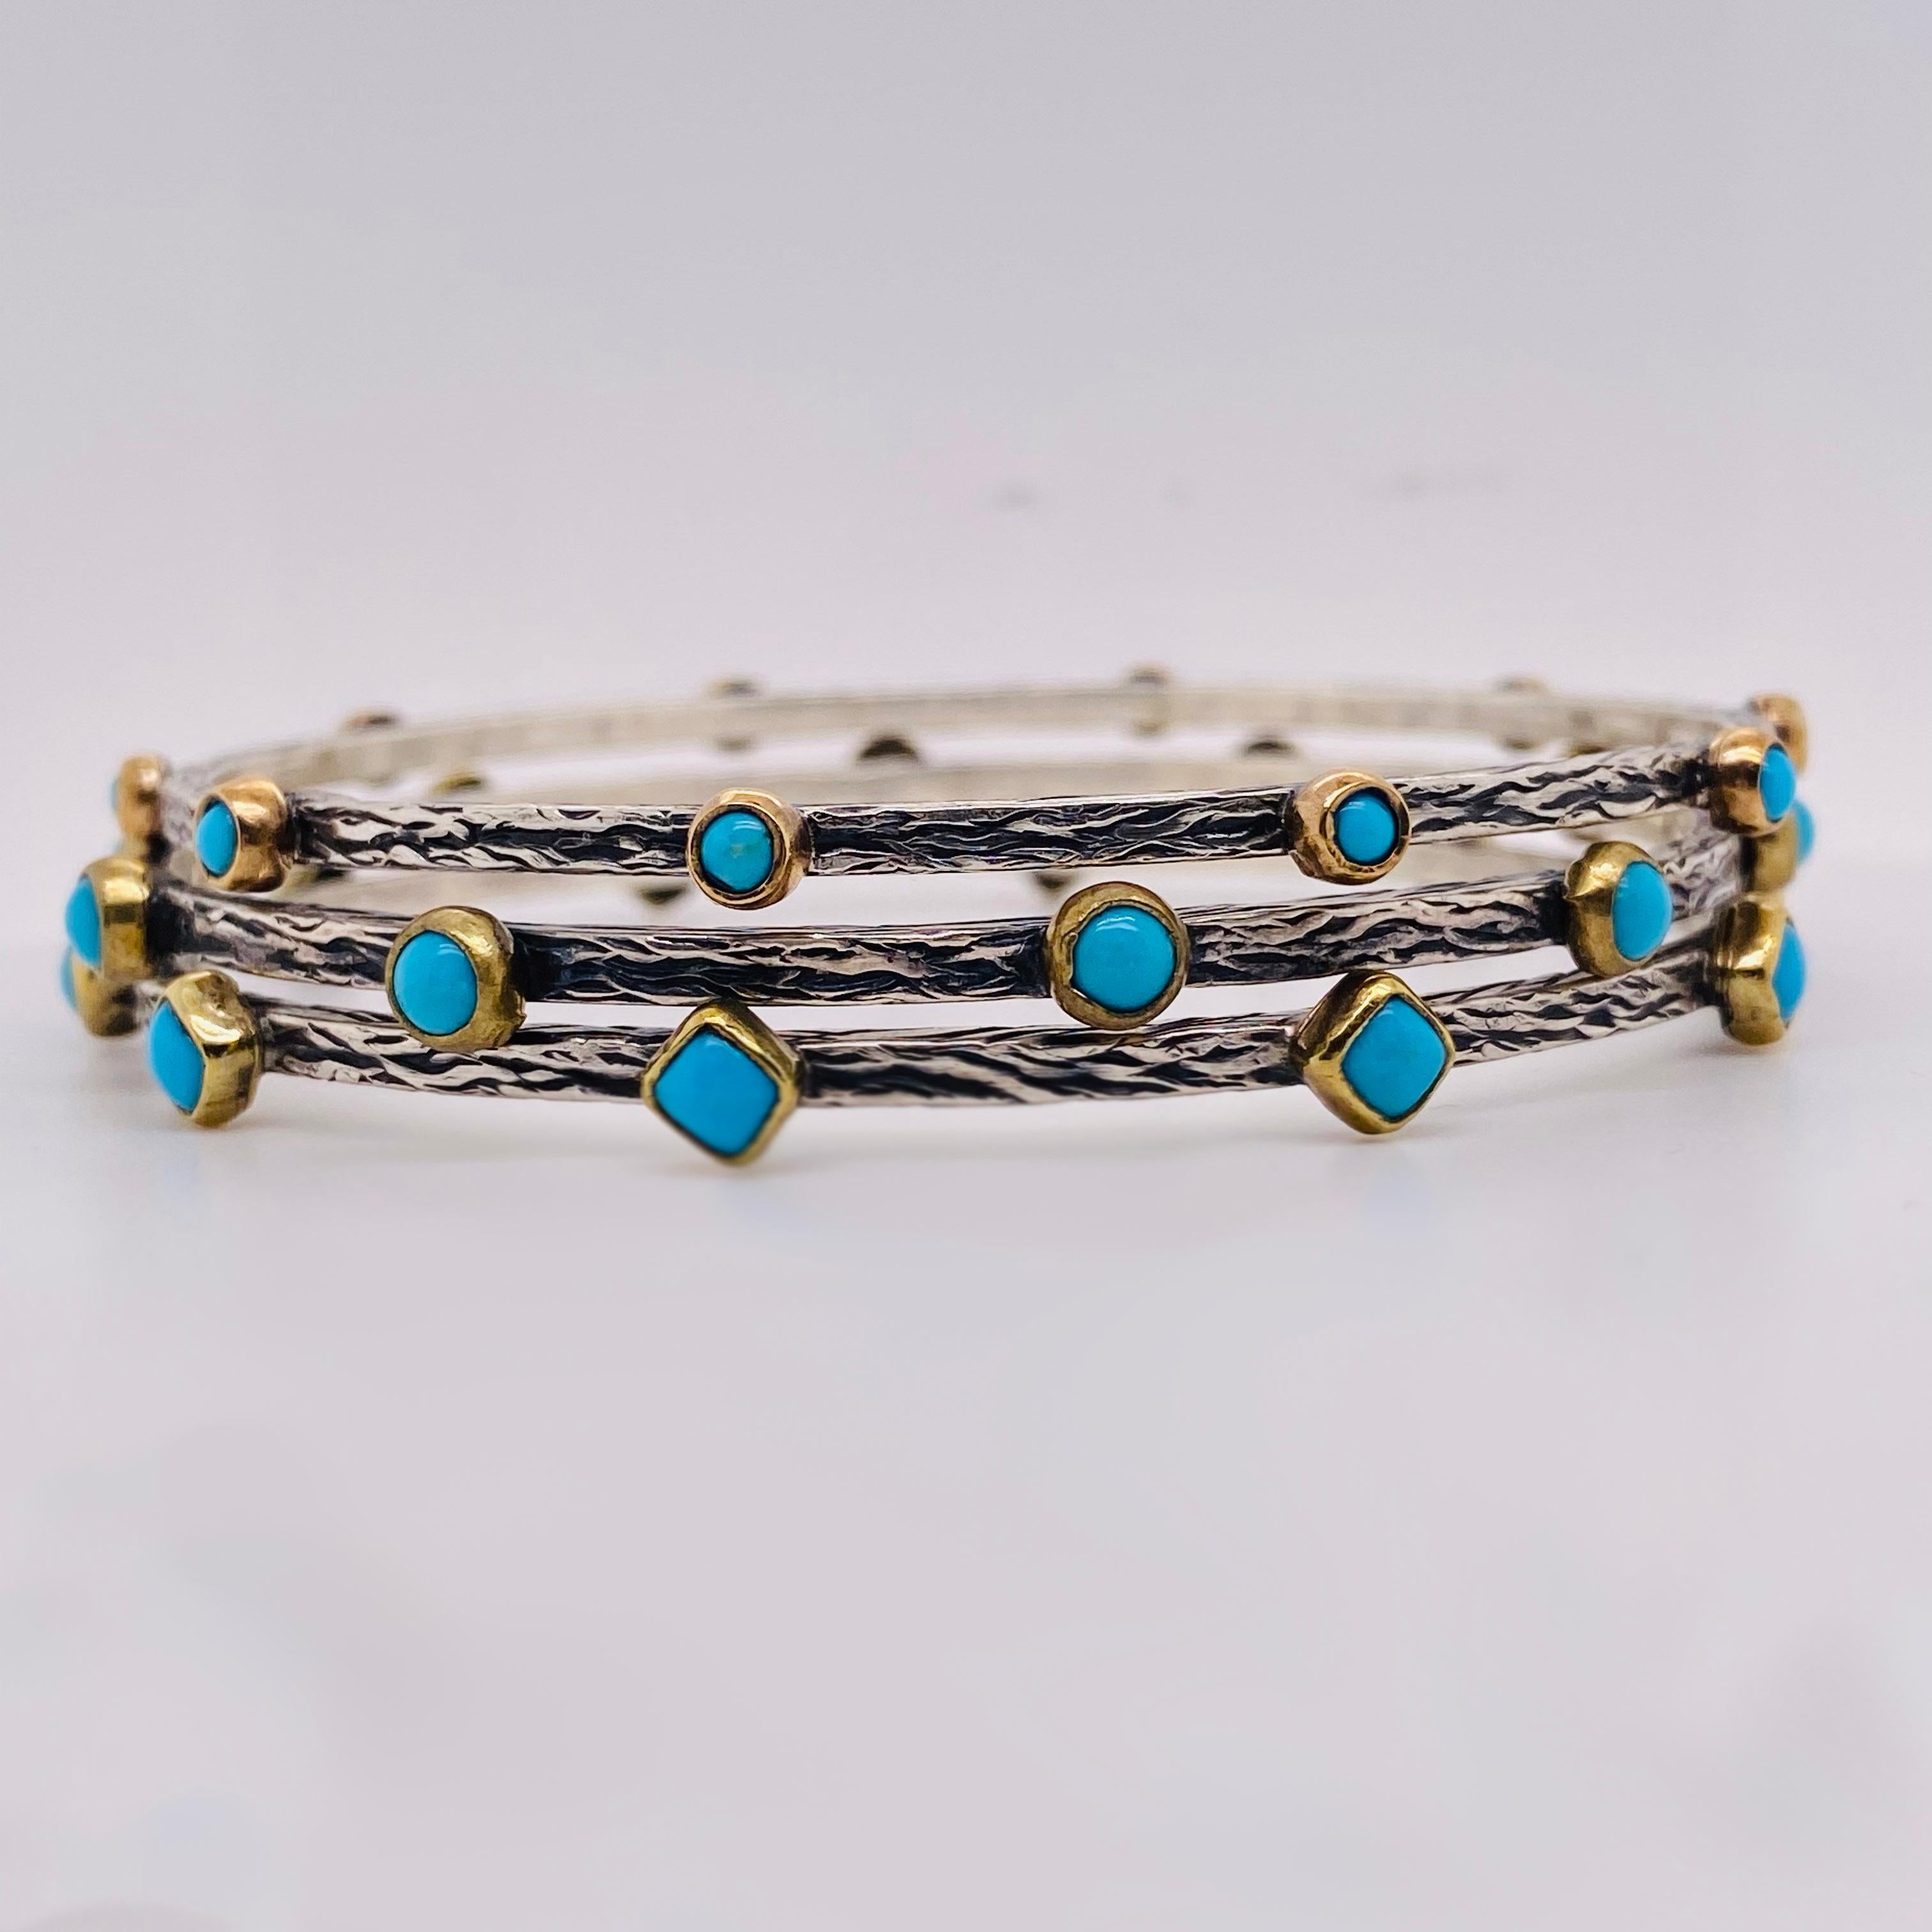 This is an amazing single bangle with turquoise!  The bracelet is oxidized sterling silver with gold bezel around each stone.  This item is for only one of the bracelets but we do have up to 3 for purchase! If you want all three we can make it a